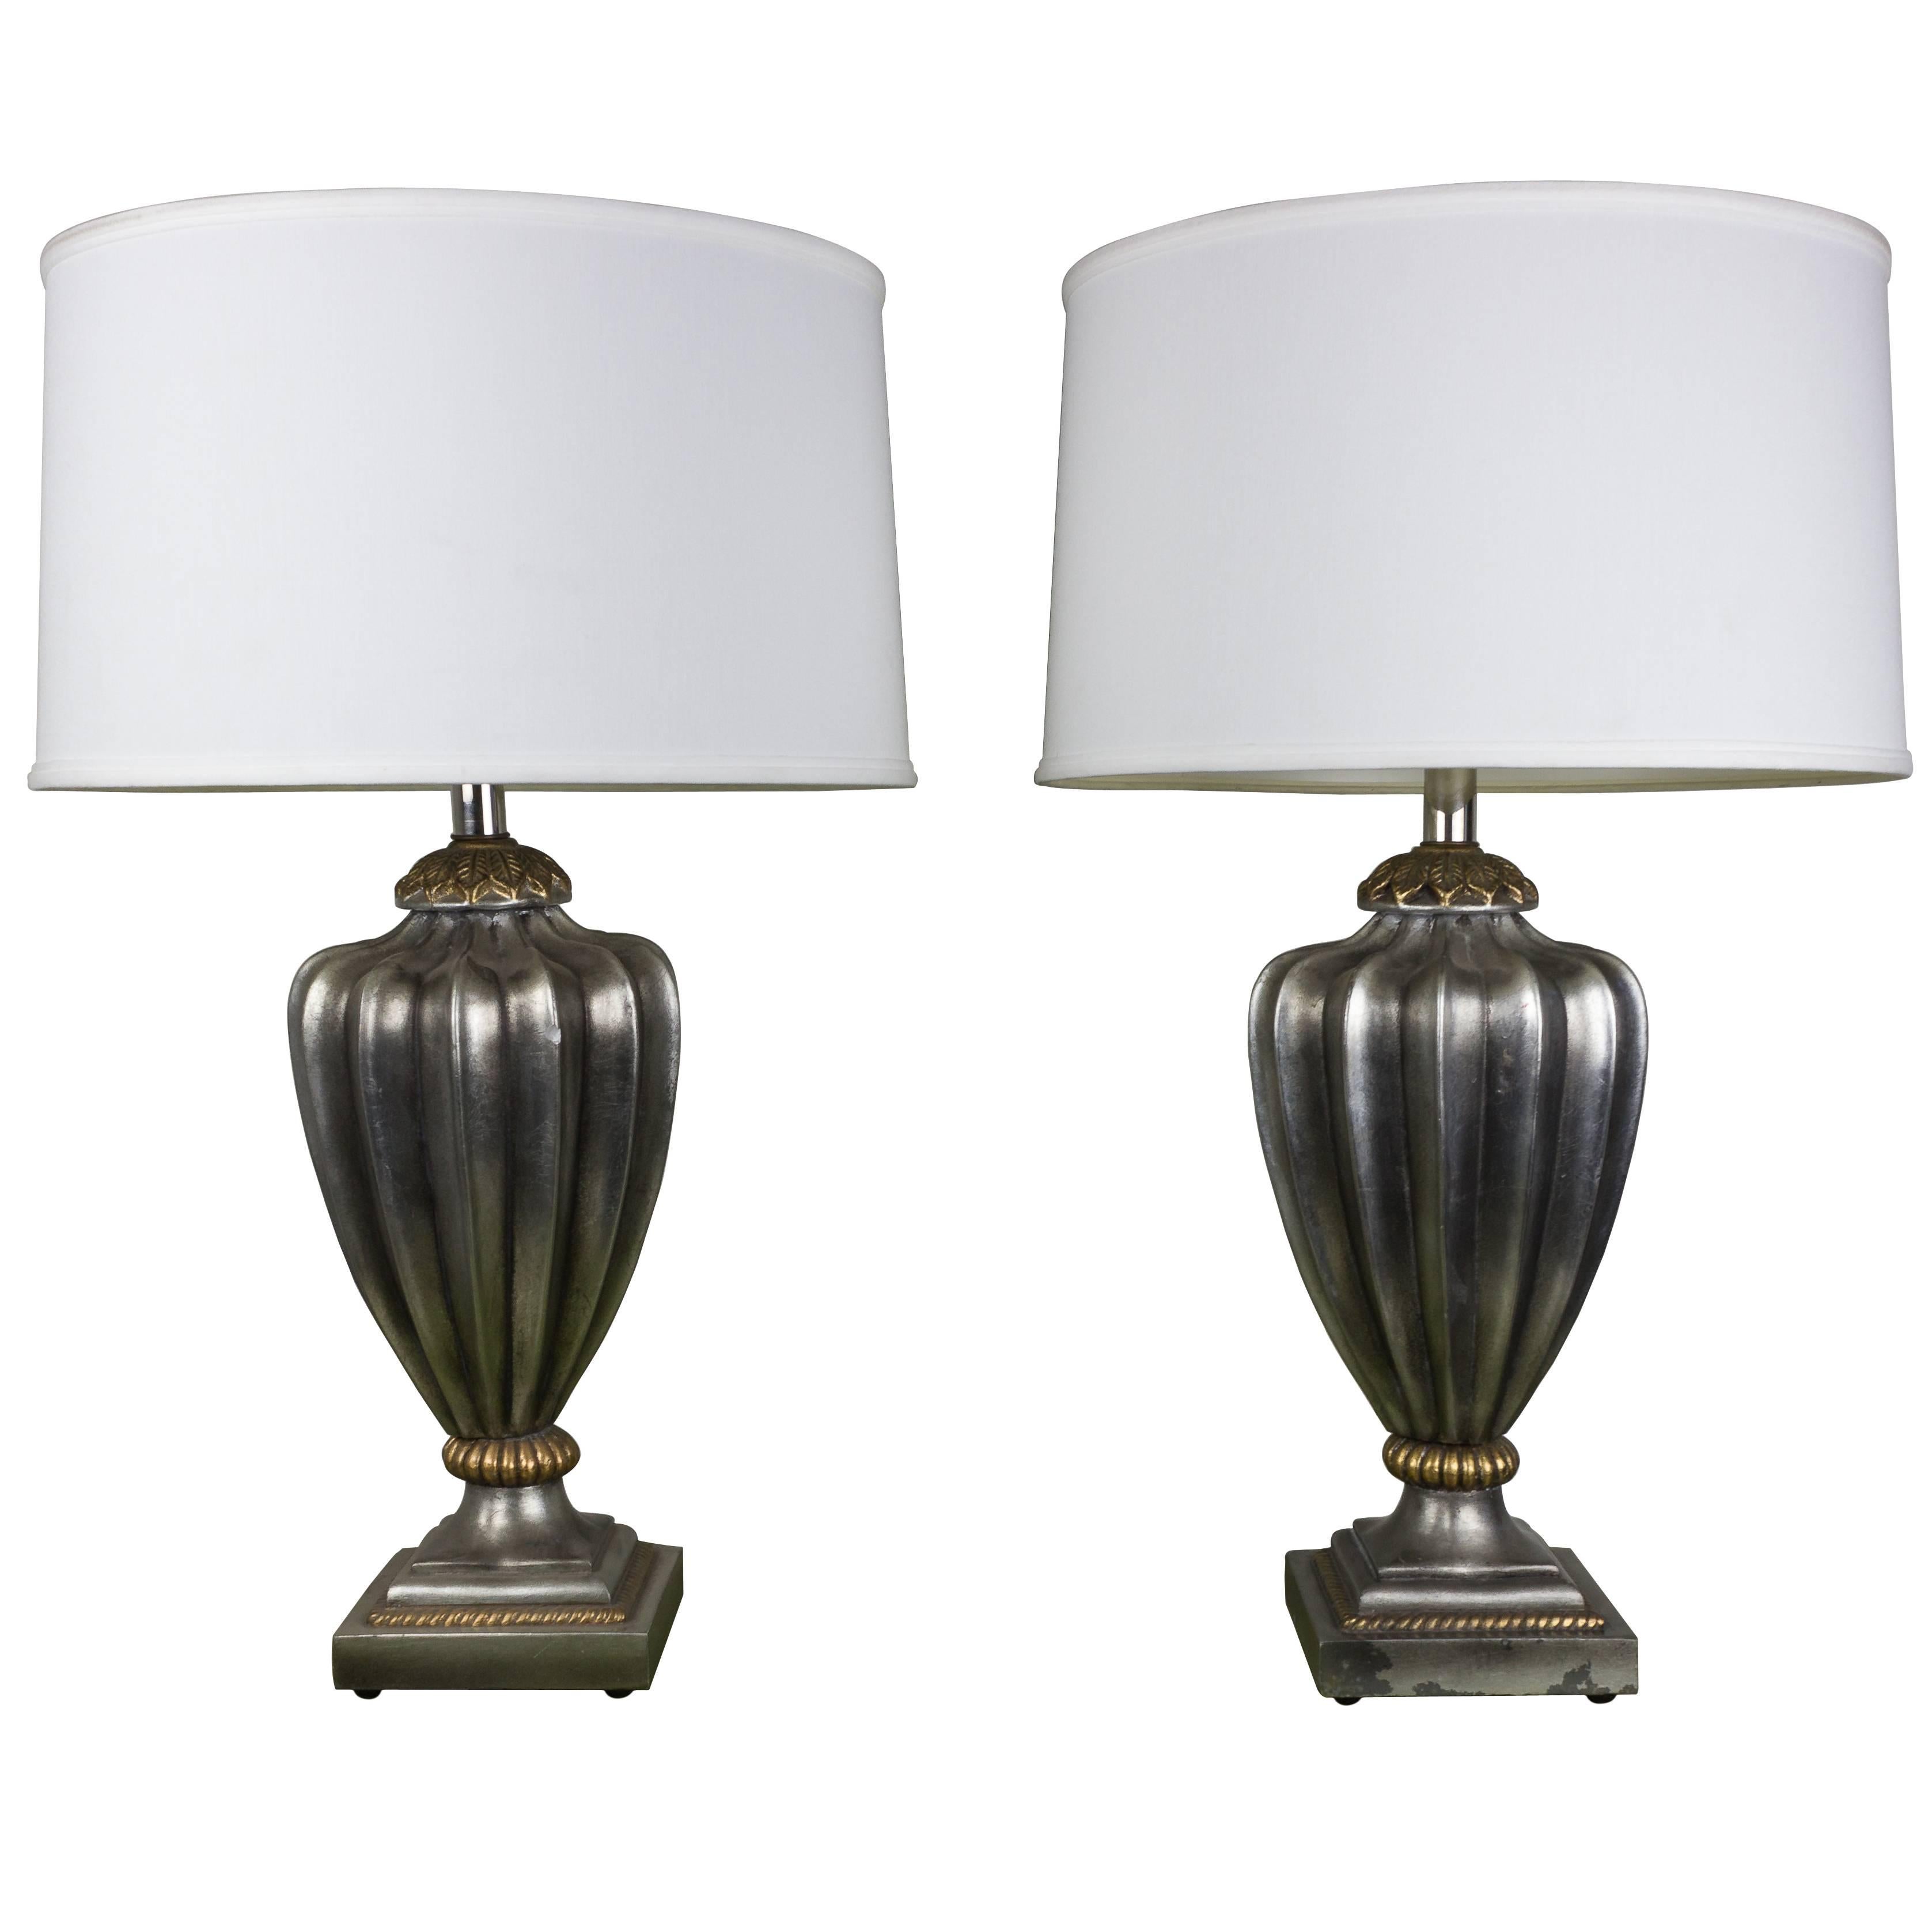 Pair of Silvered French Mid-Century Sculpted Resin Lamps With Gilt Accents